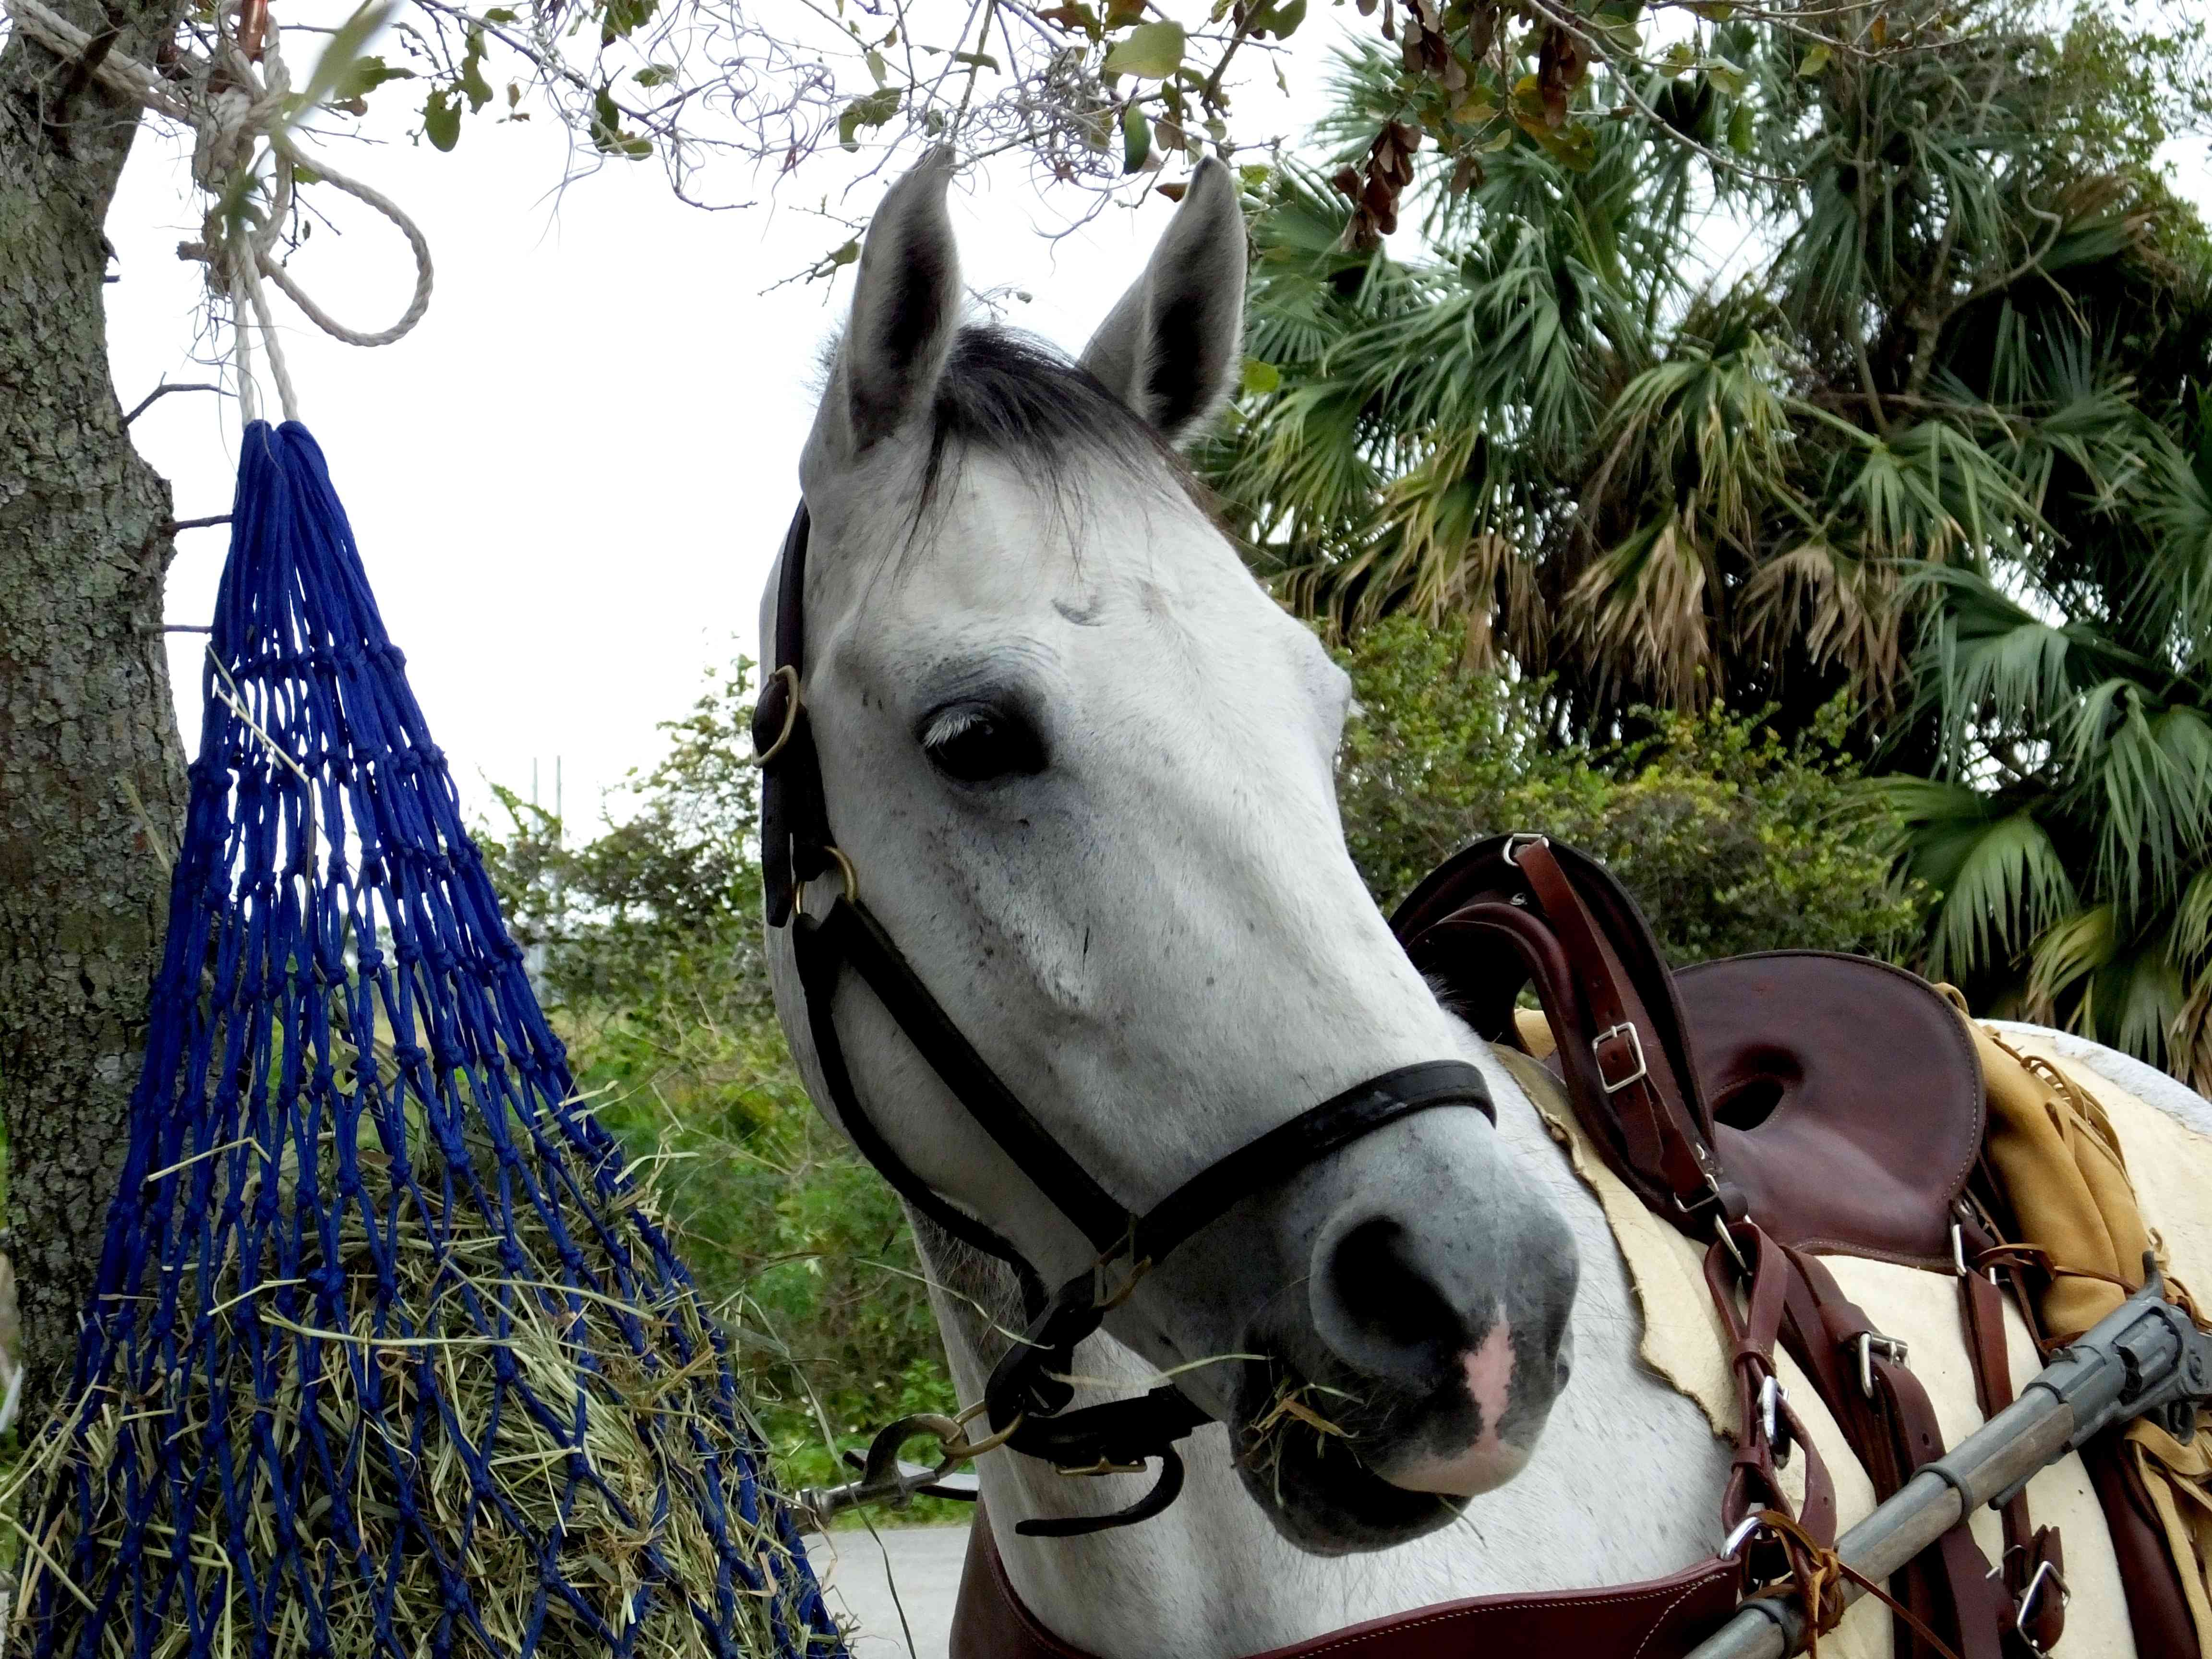 Grey Florida Cracker Horse eating from a hay net.